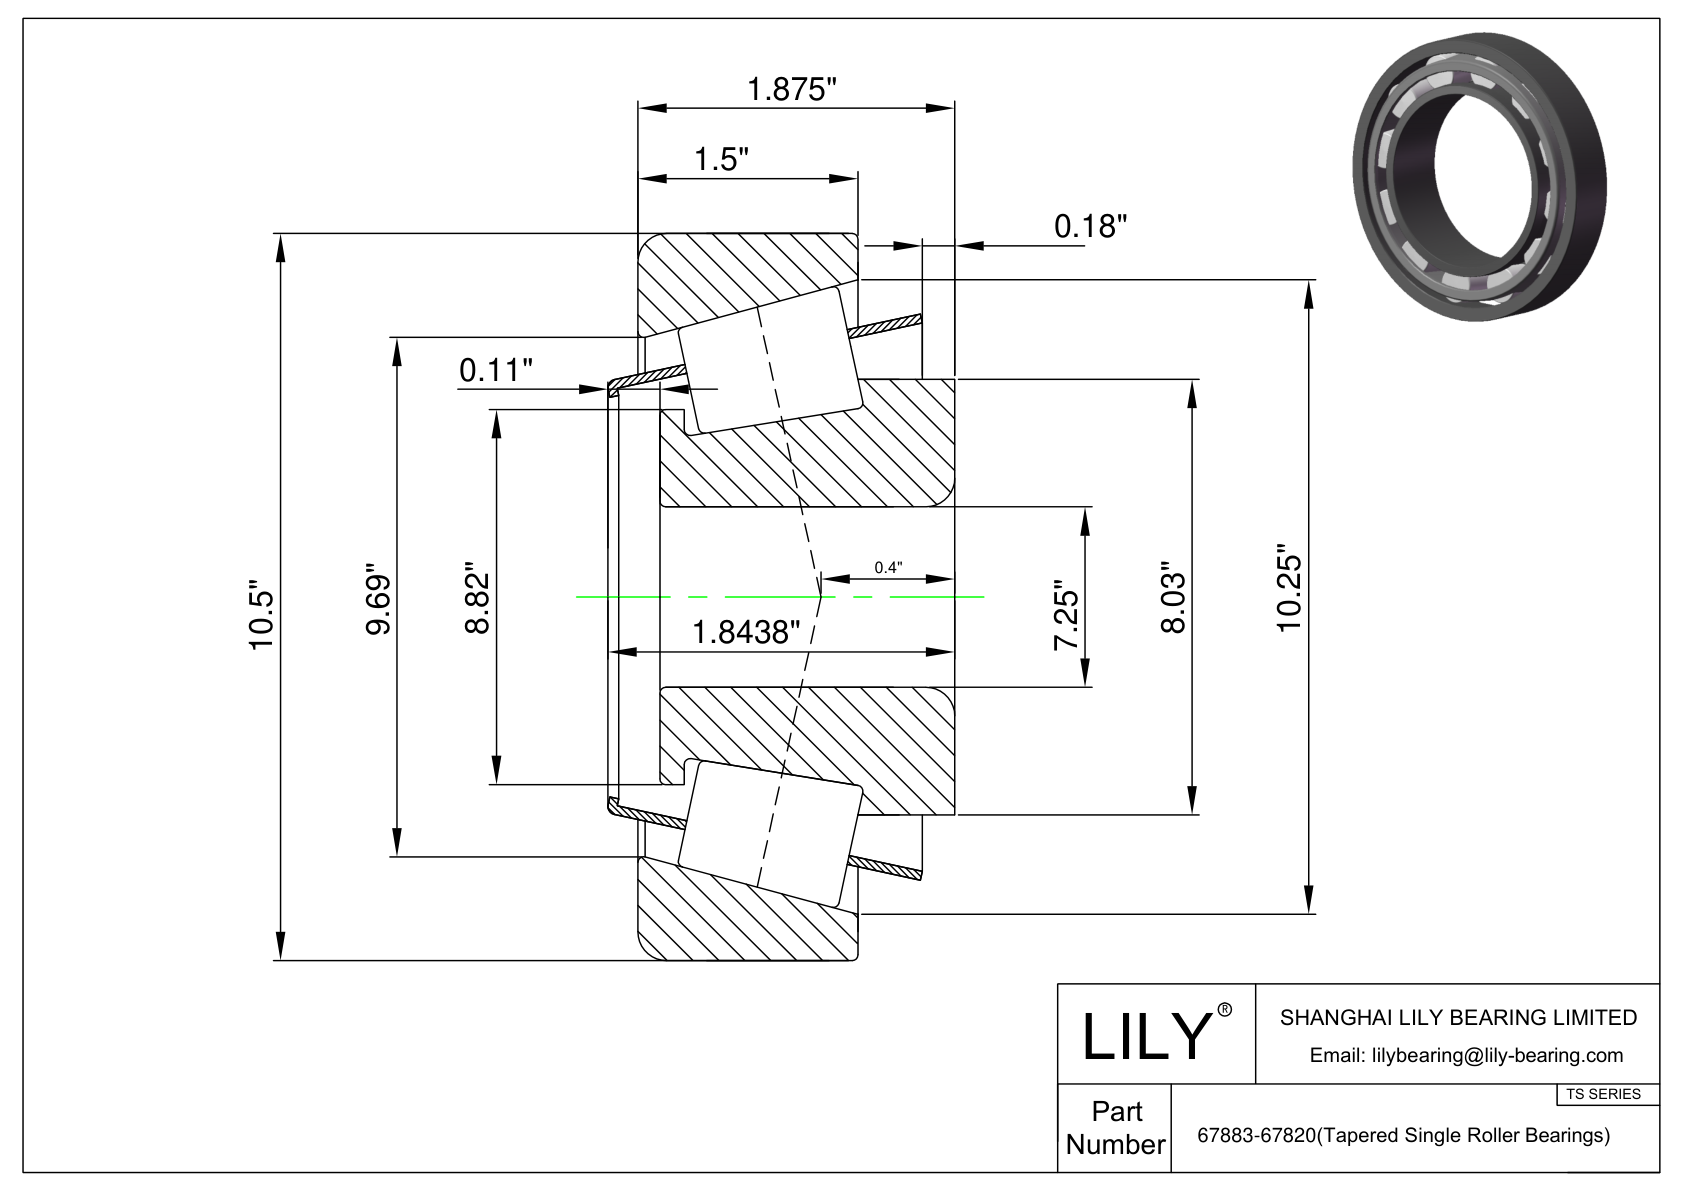 67883-67820 TS (Tapered Single Roller Bearings) (Imperial) cad drawing